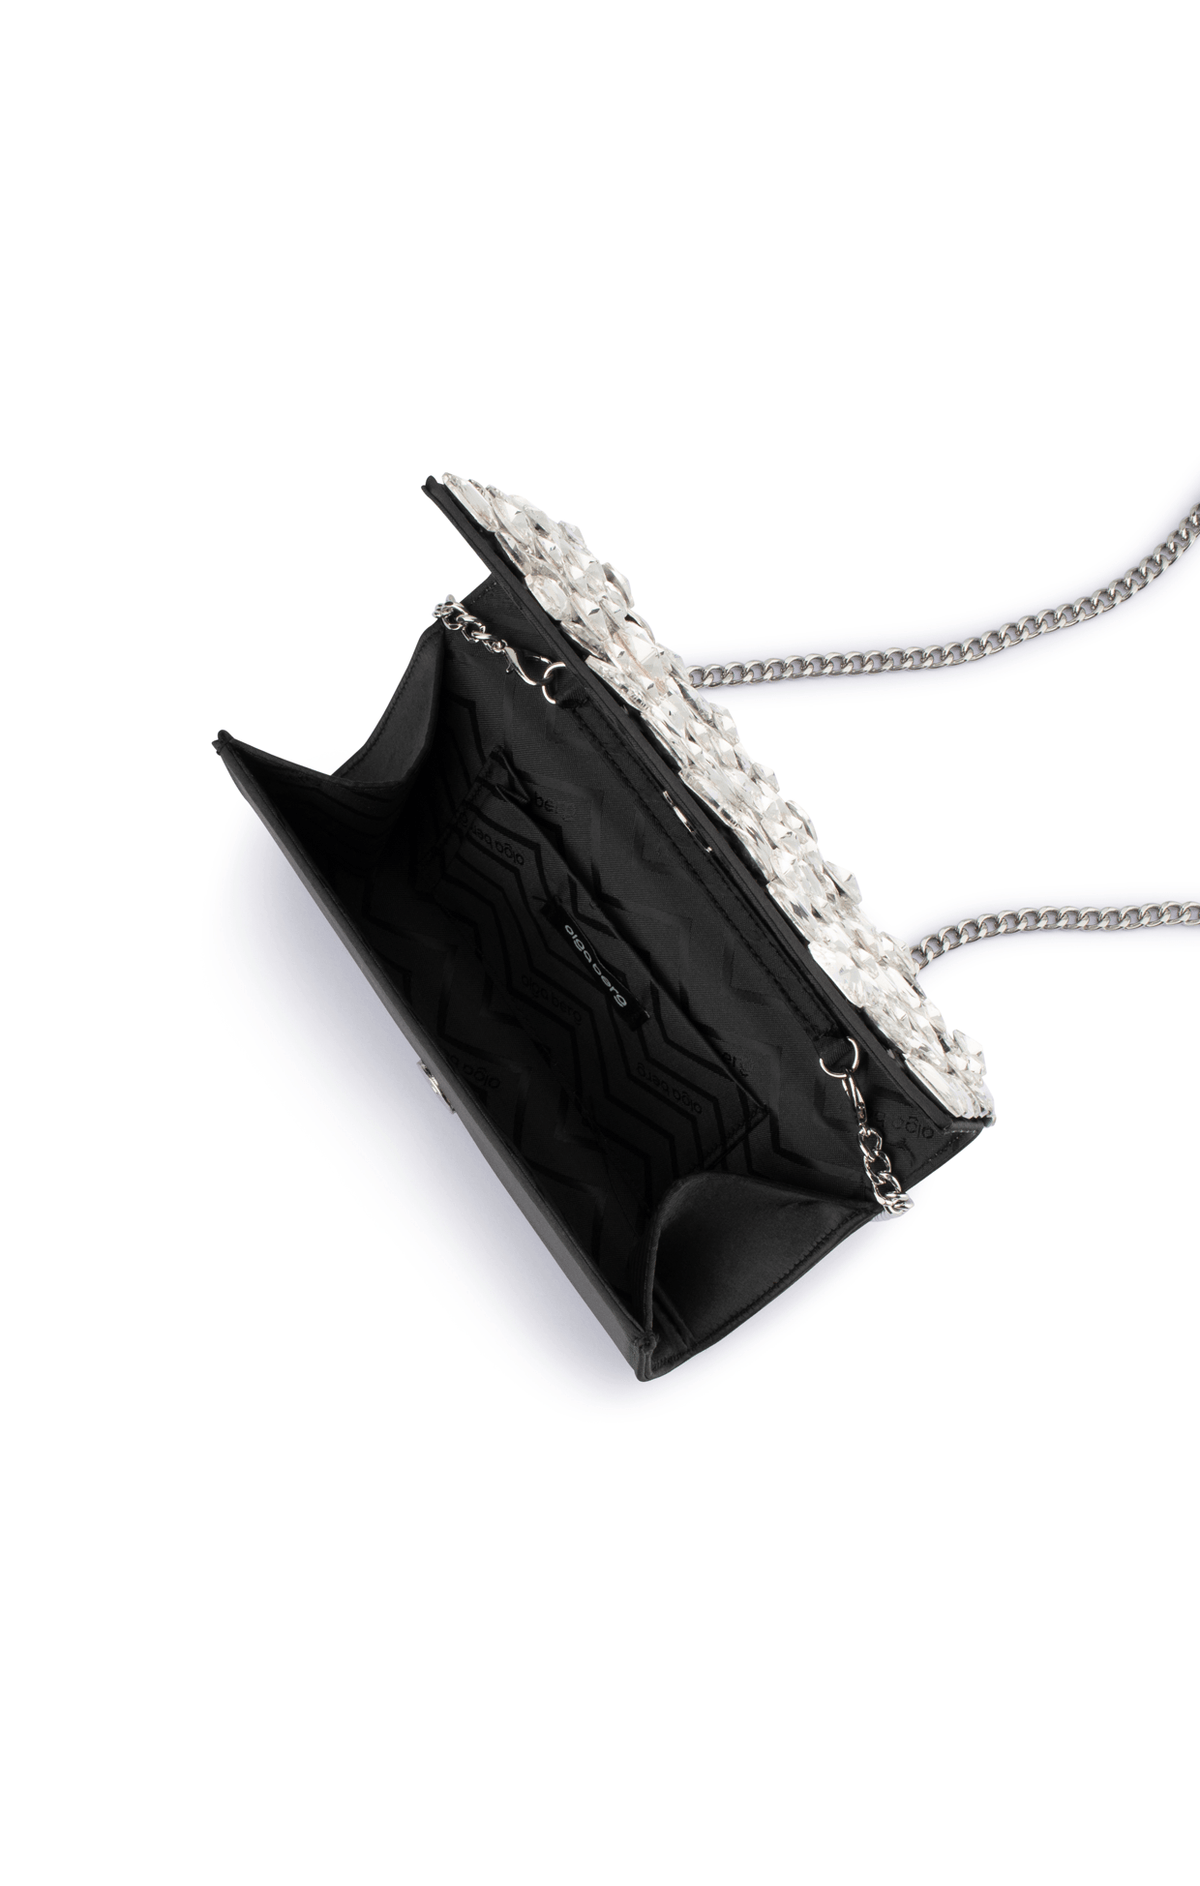 ACCESSORIES Bags Clutches OS / BLACK RENATA CRYSTAL ENCRUSTED CLUTCH